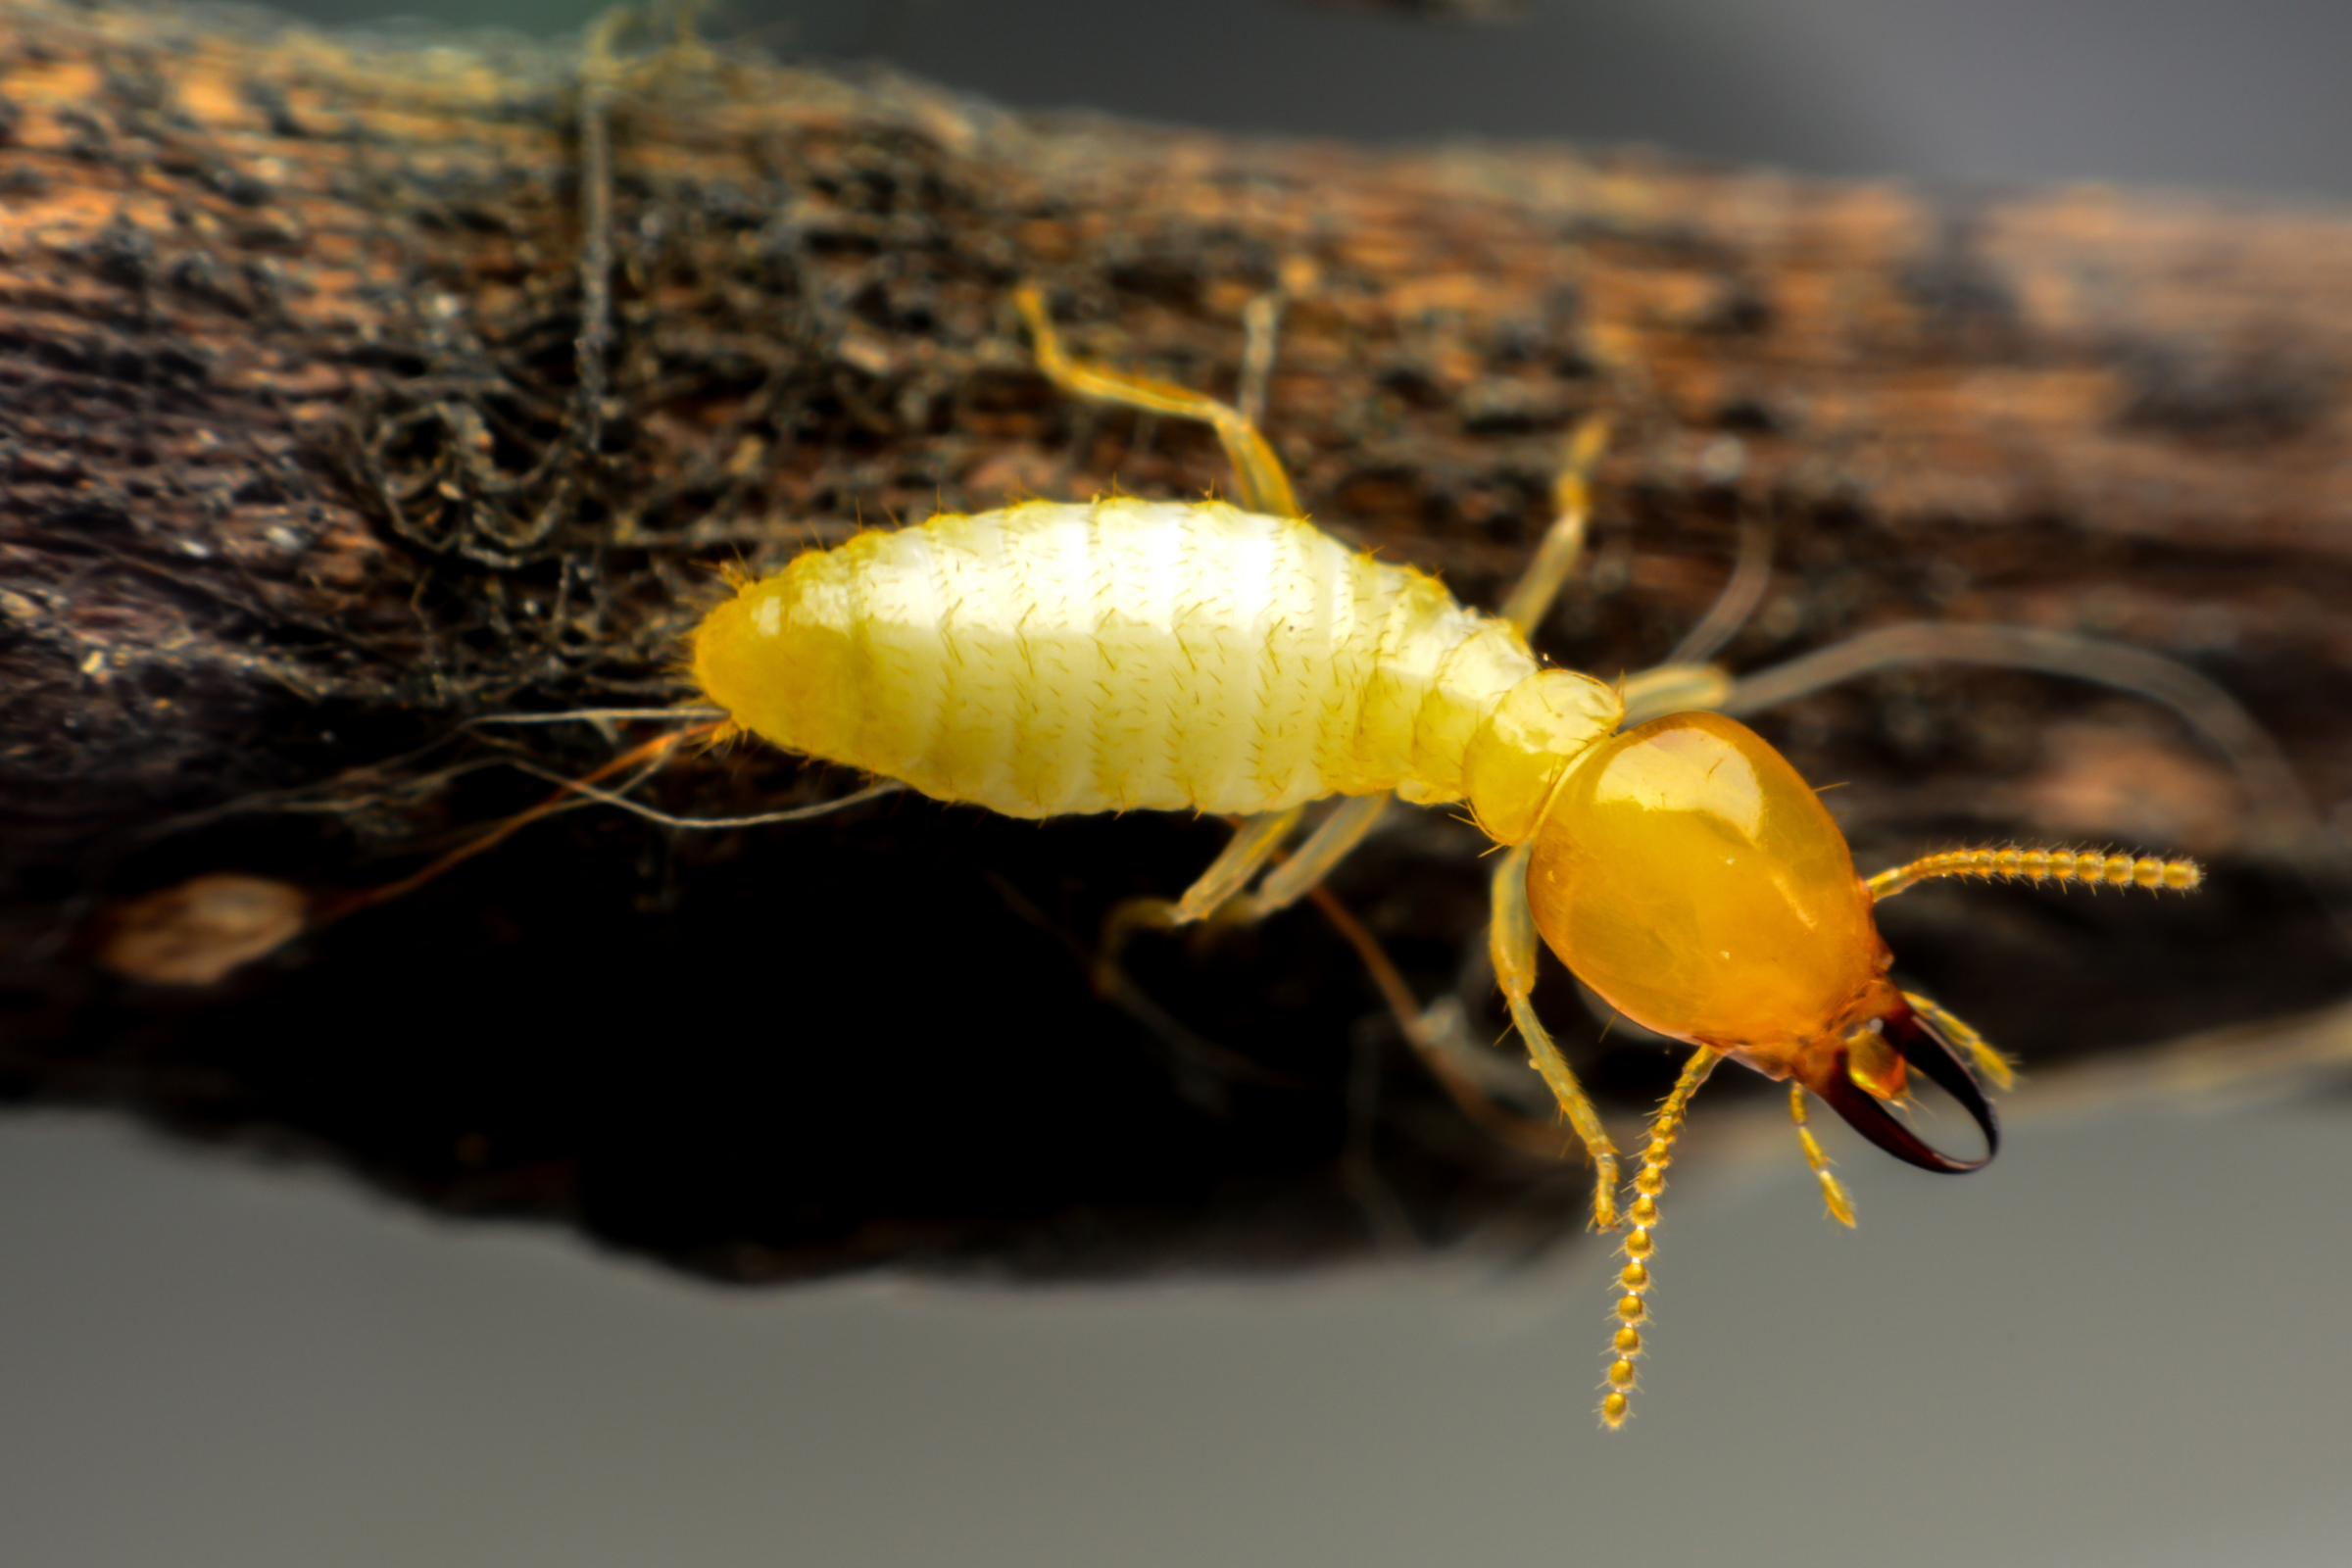 up close picture of a golden termite crawling on wood